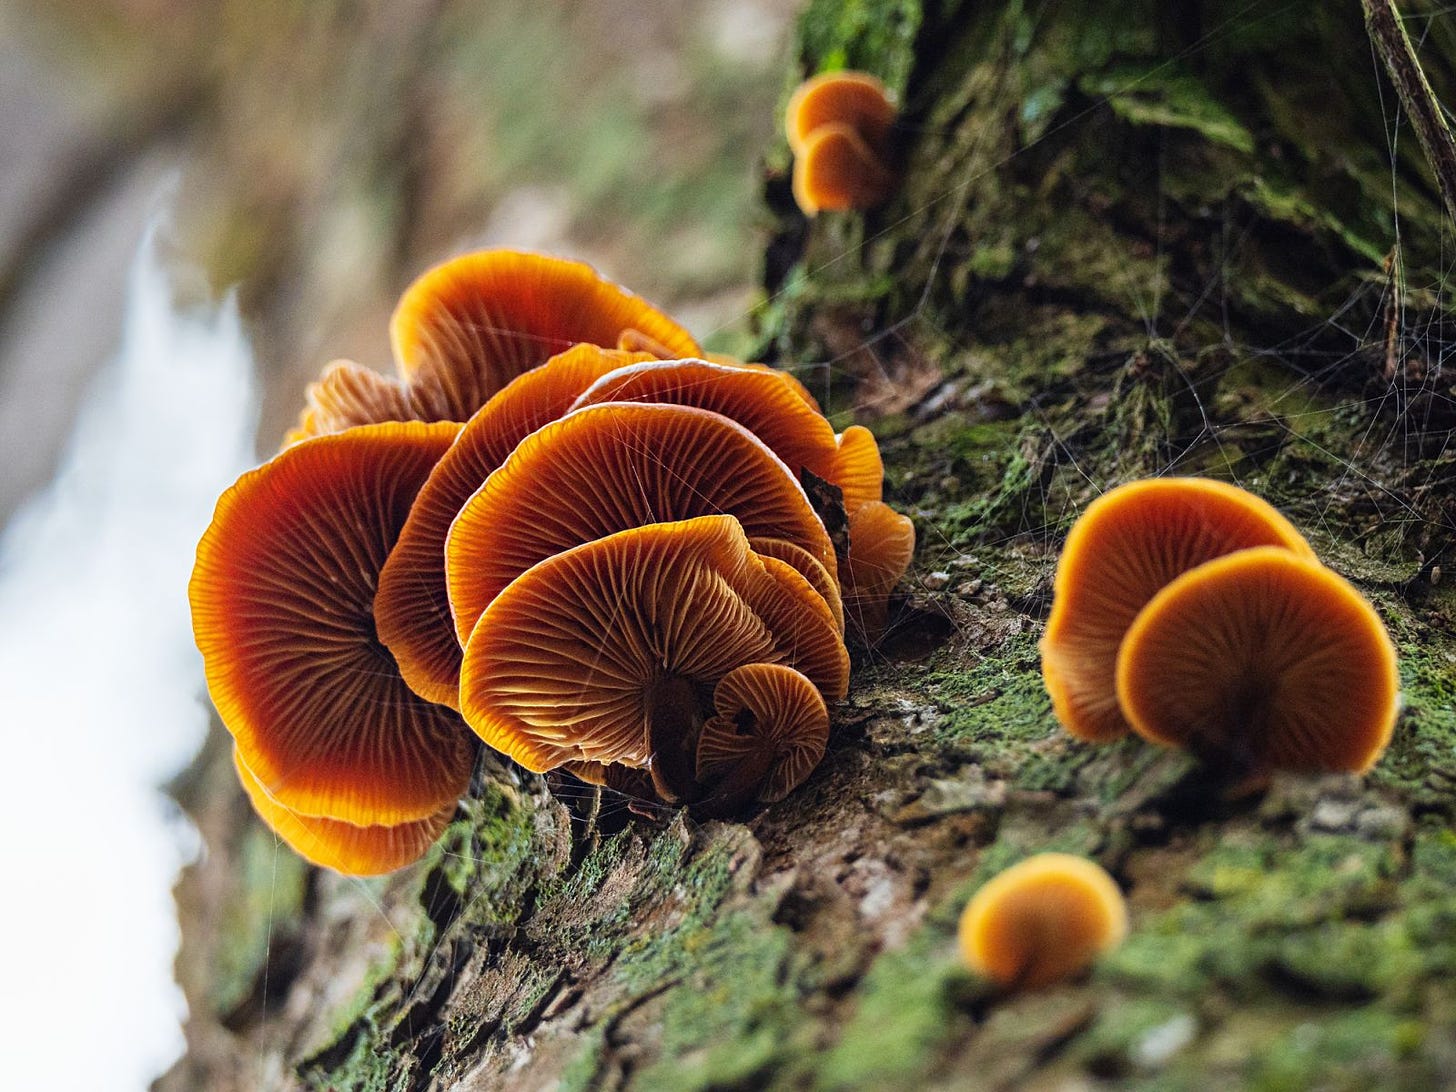 The mycelium of fungi is used to make mycoprotein (Photo: Getty Images)